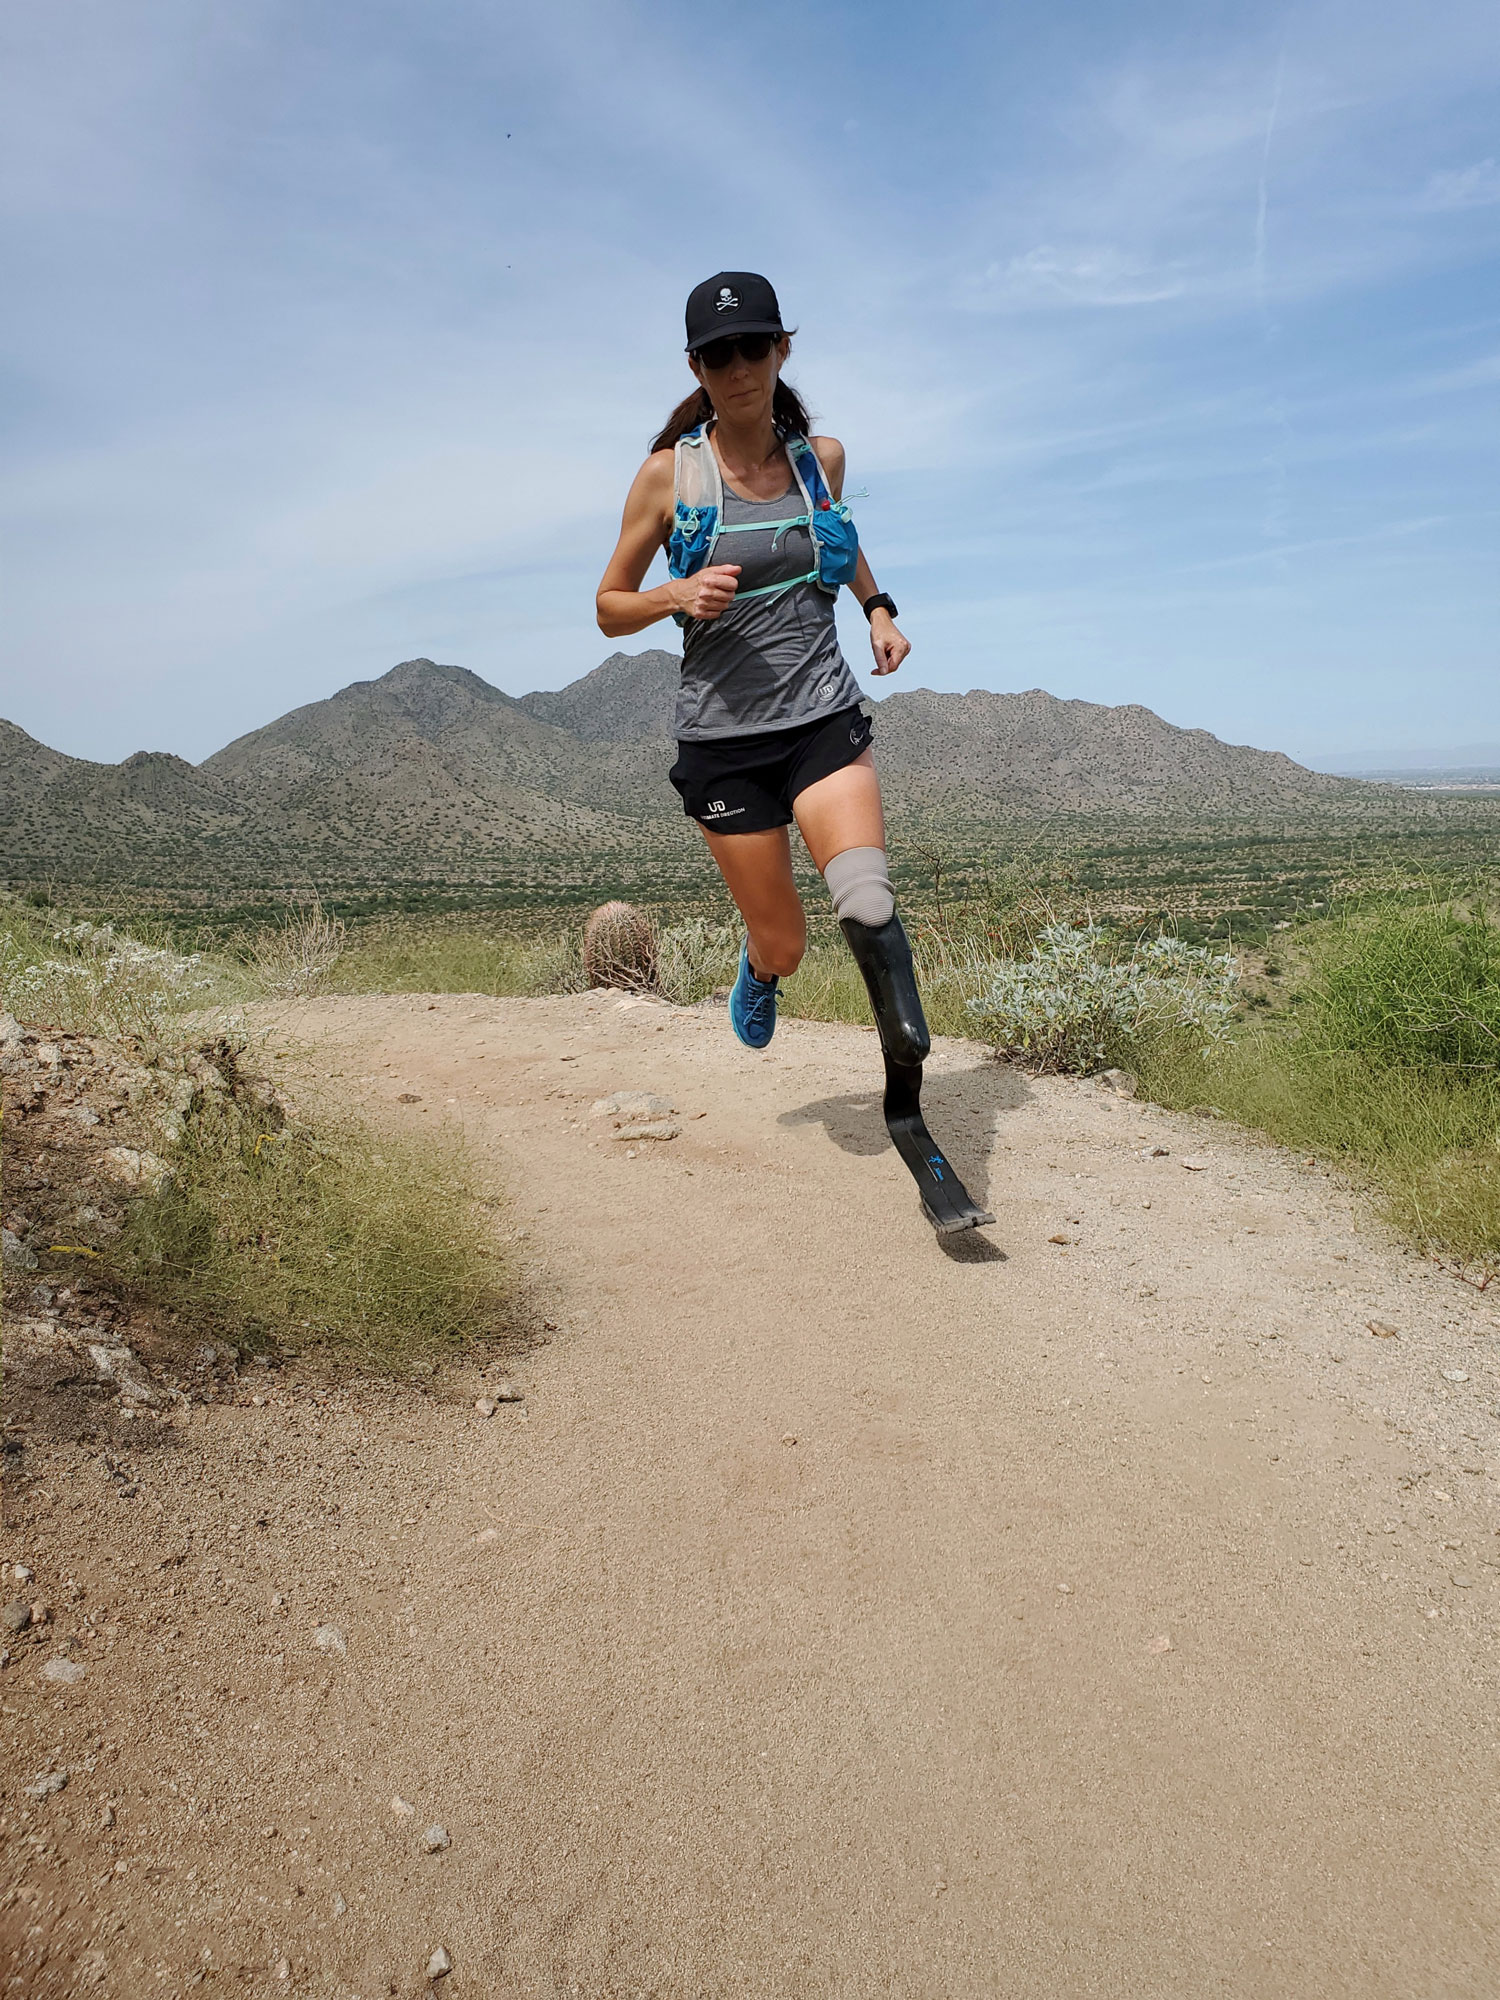 Amputee ultrarunner Jacky Hunt-Broersma runs on a dirt path with her running blade and brown mountains behind her.